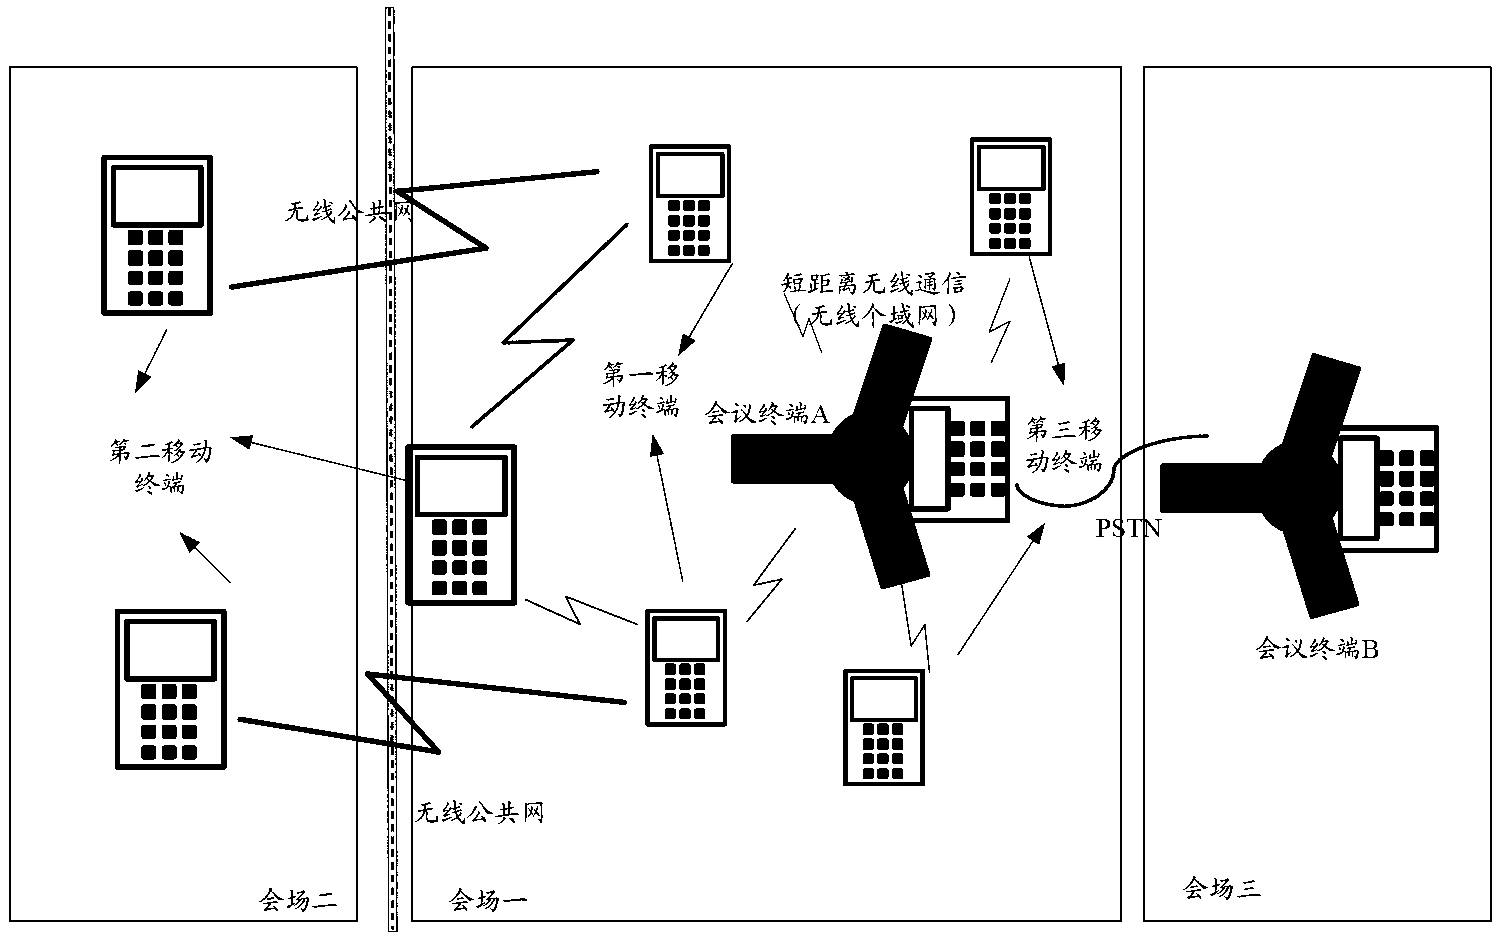 Method and device for realizing teleconference